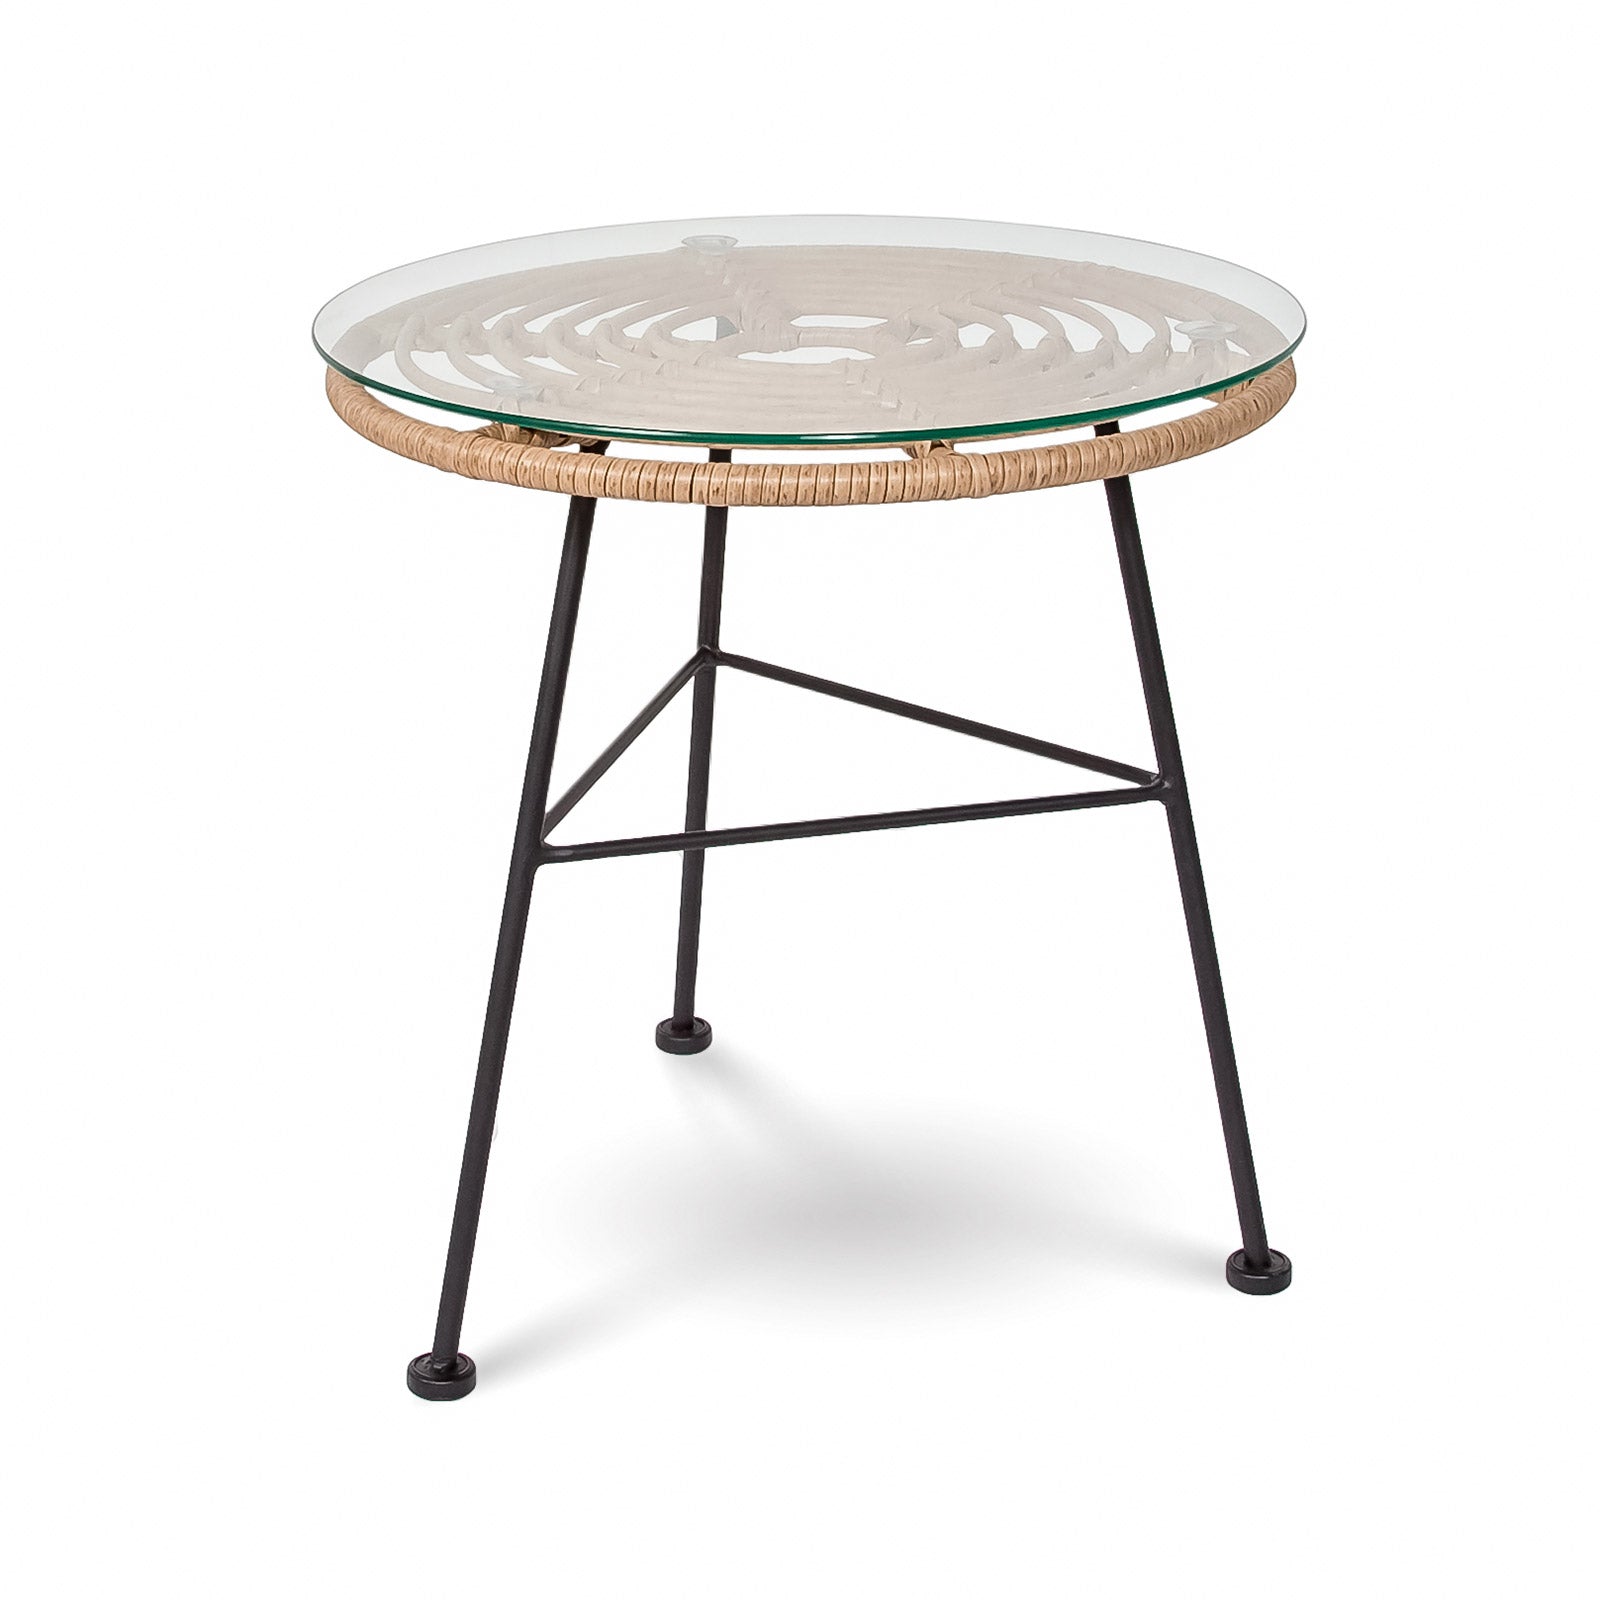 Callie Round Accent Table - Rug & Weave